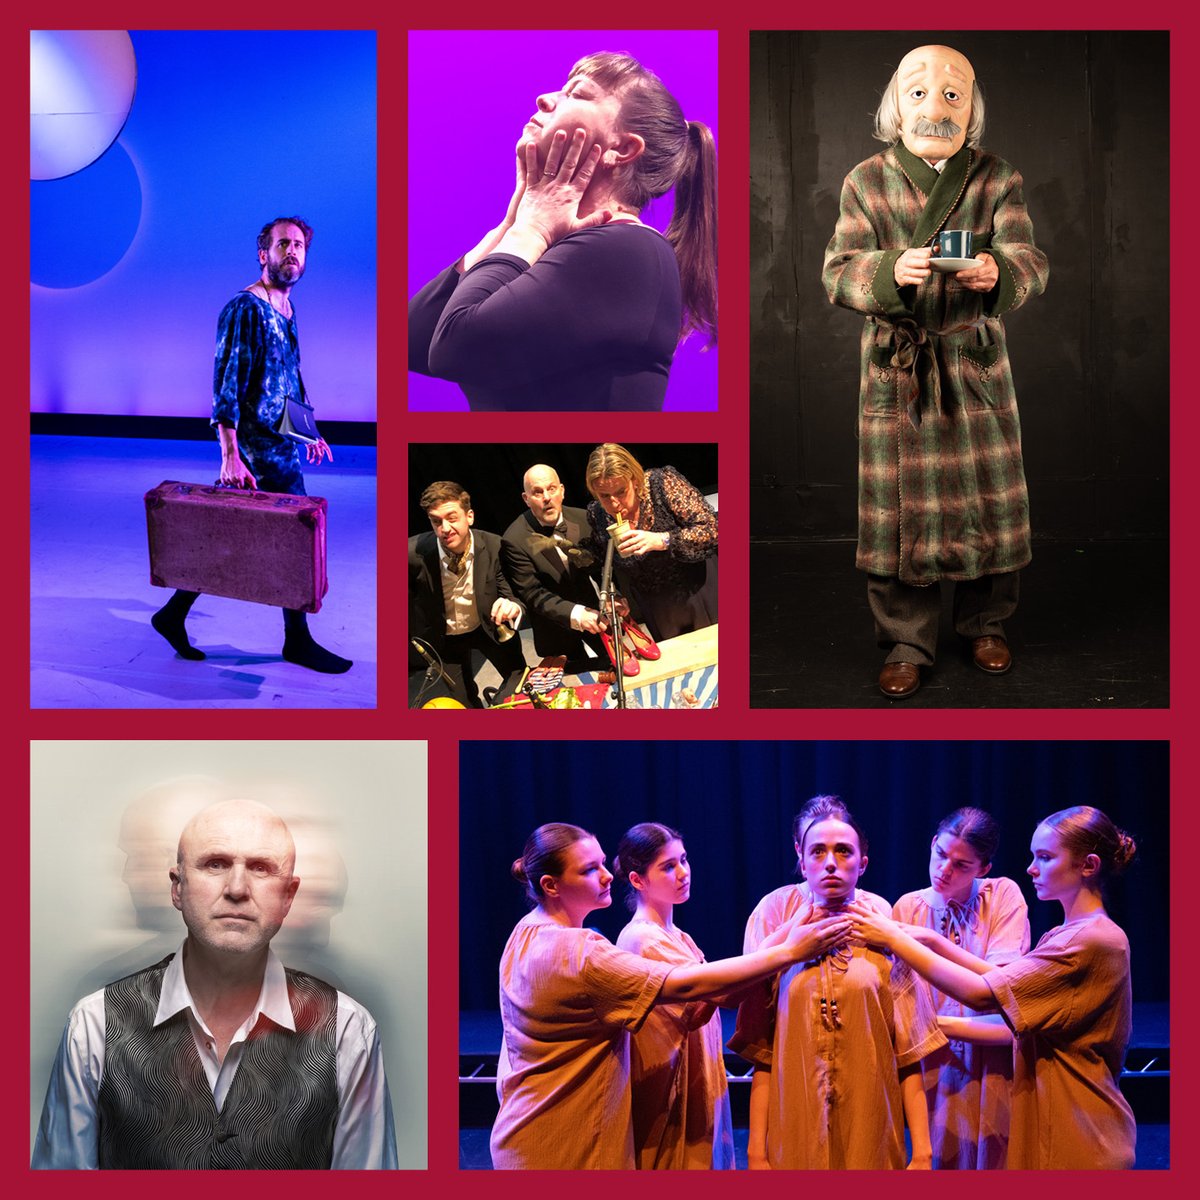 HAPPY WORLD THEATRE DAY! Today is #worldtheatreday and we thought we'd mark it by sharing a selection of images from just some of the theatre events we've presented at JAC in 2024! Here's to an exciting theatrical year to come...and many more beyond!